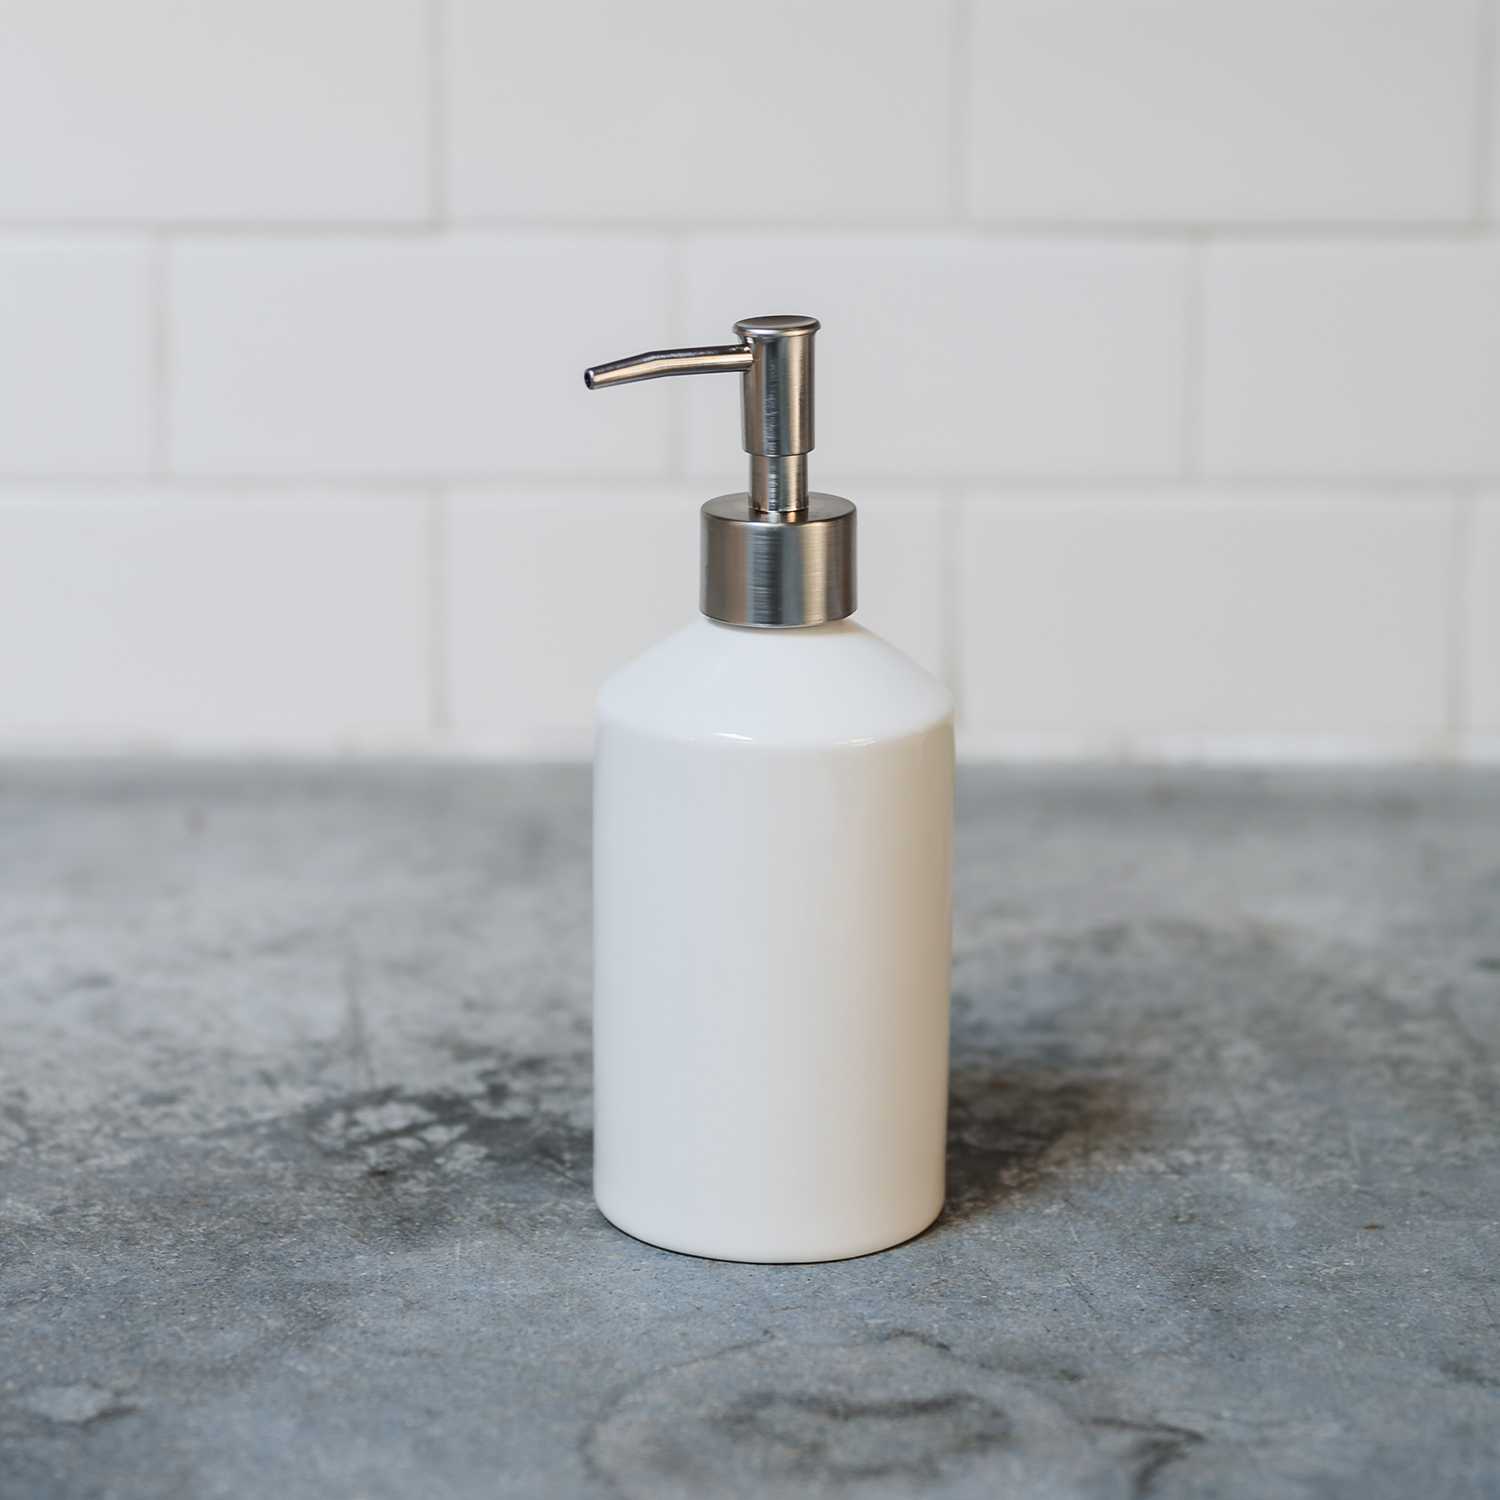 15 Fluid-Ounce Soap Dispenser with Brushed Nickel Pump – Klaywell